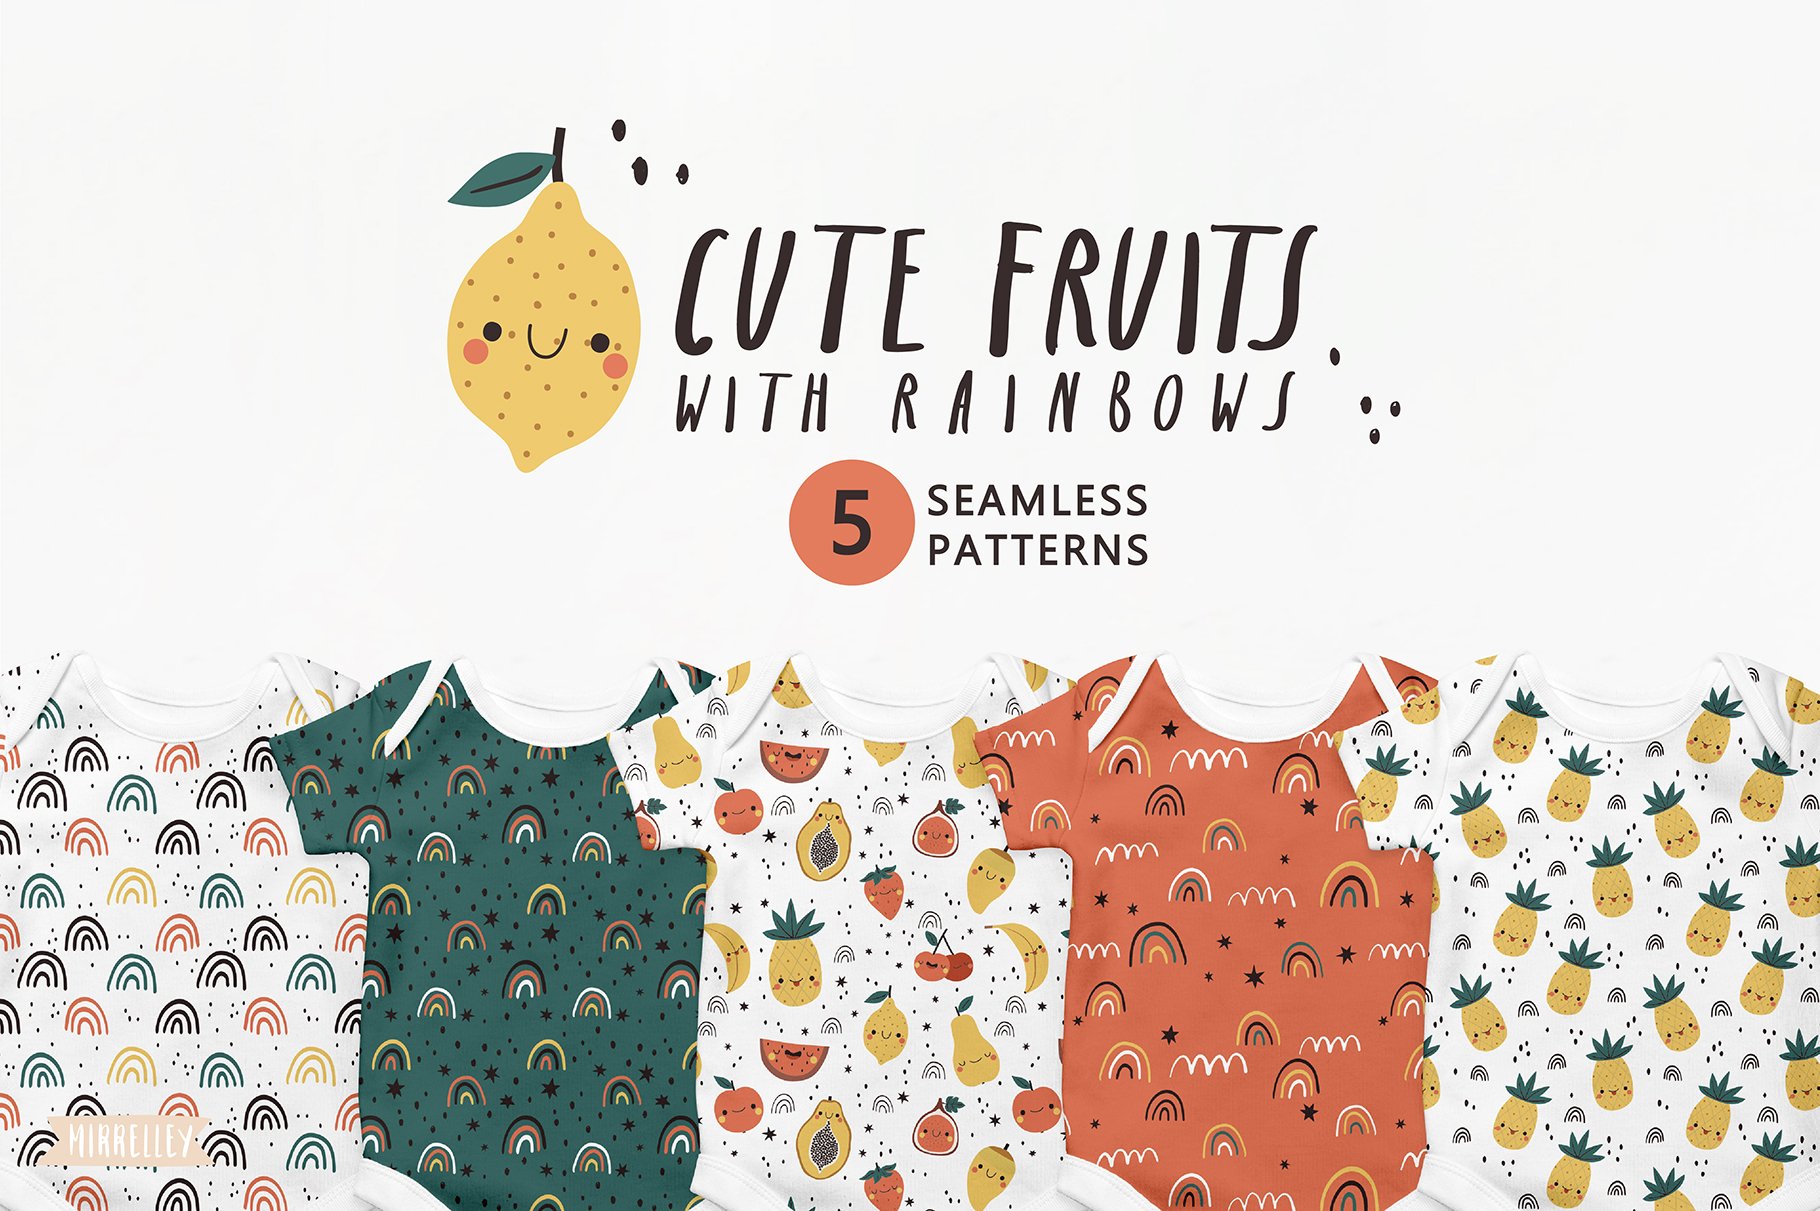 Cute Fruits & Rainbows patterns set cover image.